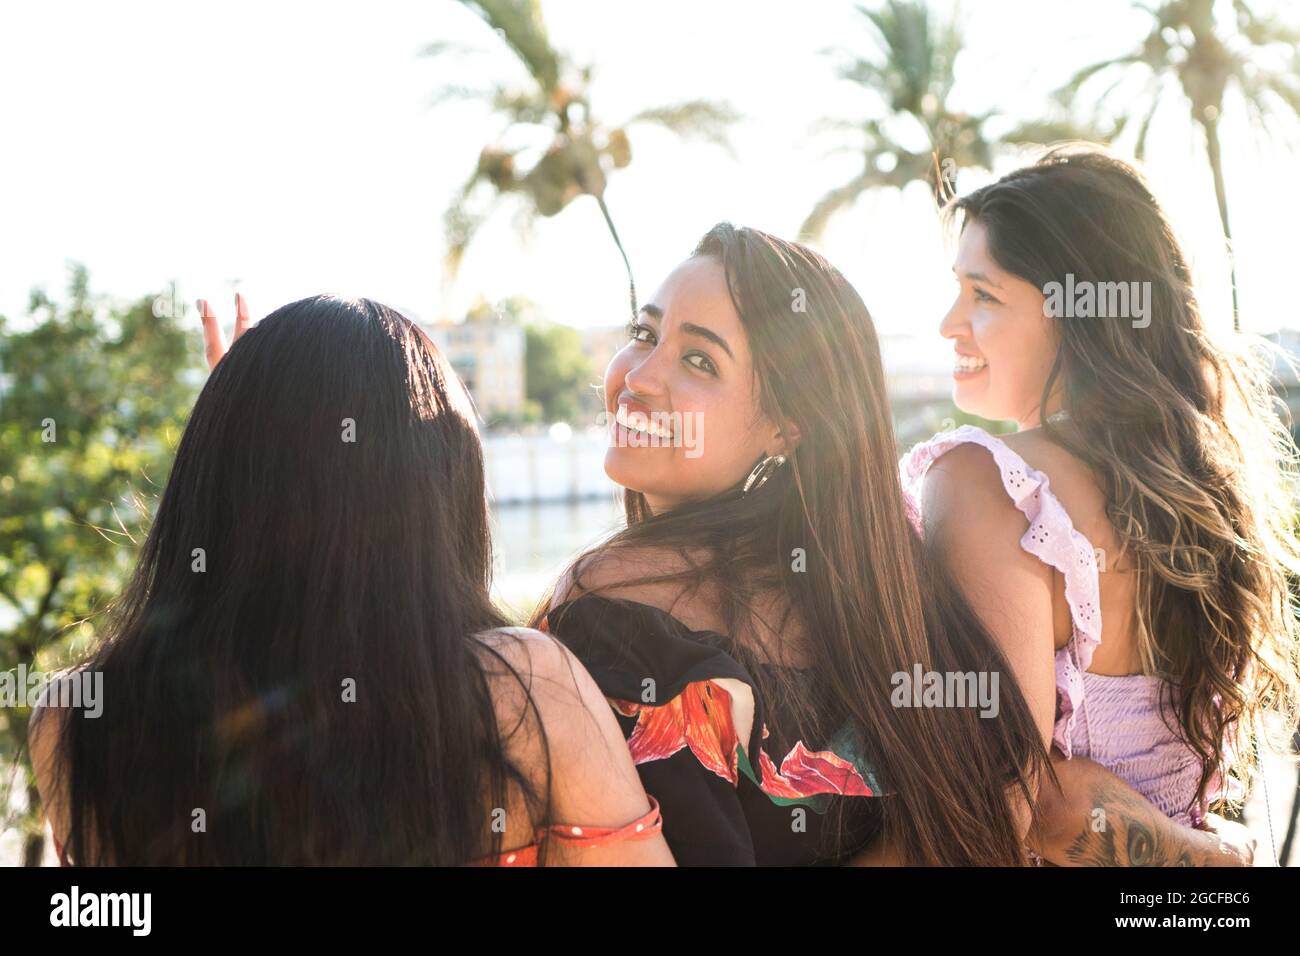 Three young friends outdoors enjoying a nice summer afternoon. Latin girls  sitting together with their backs turned and one of them looking at the cam  Stock Photo - Alamy